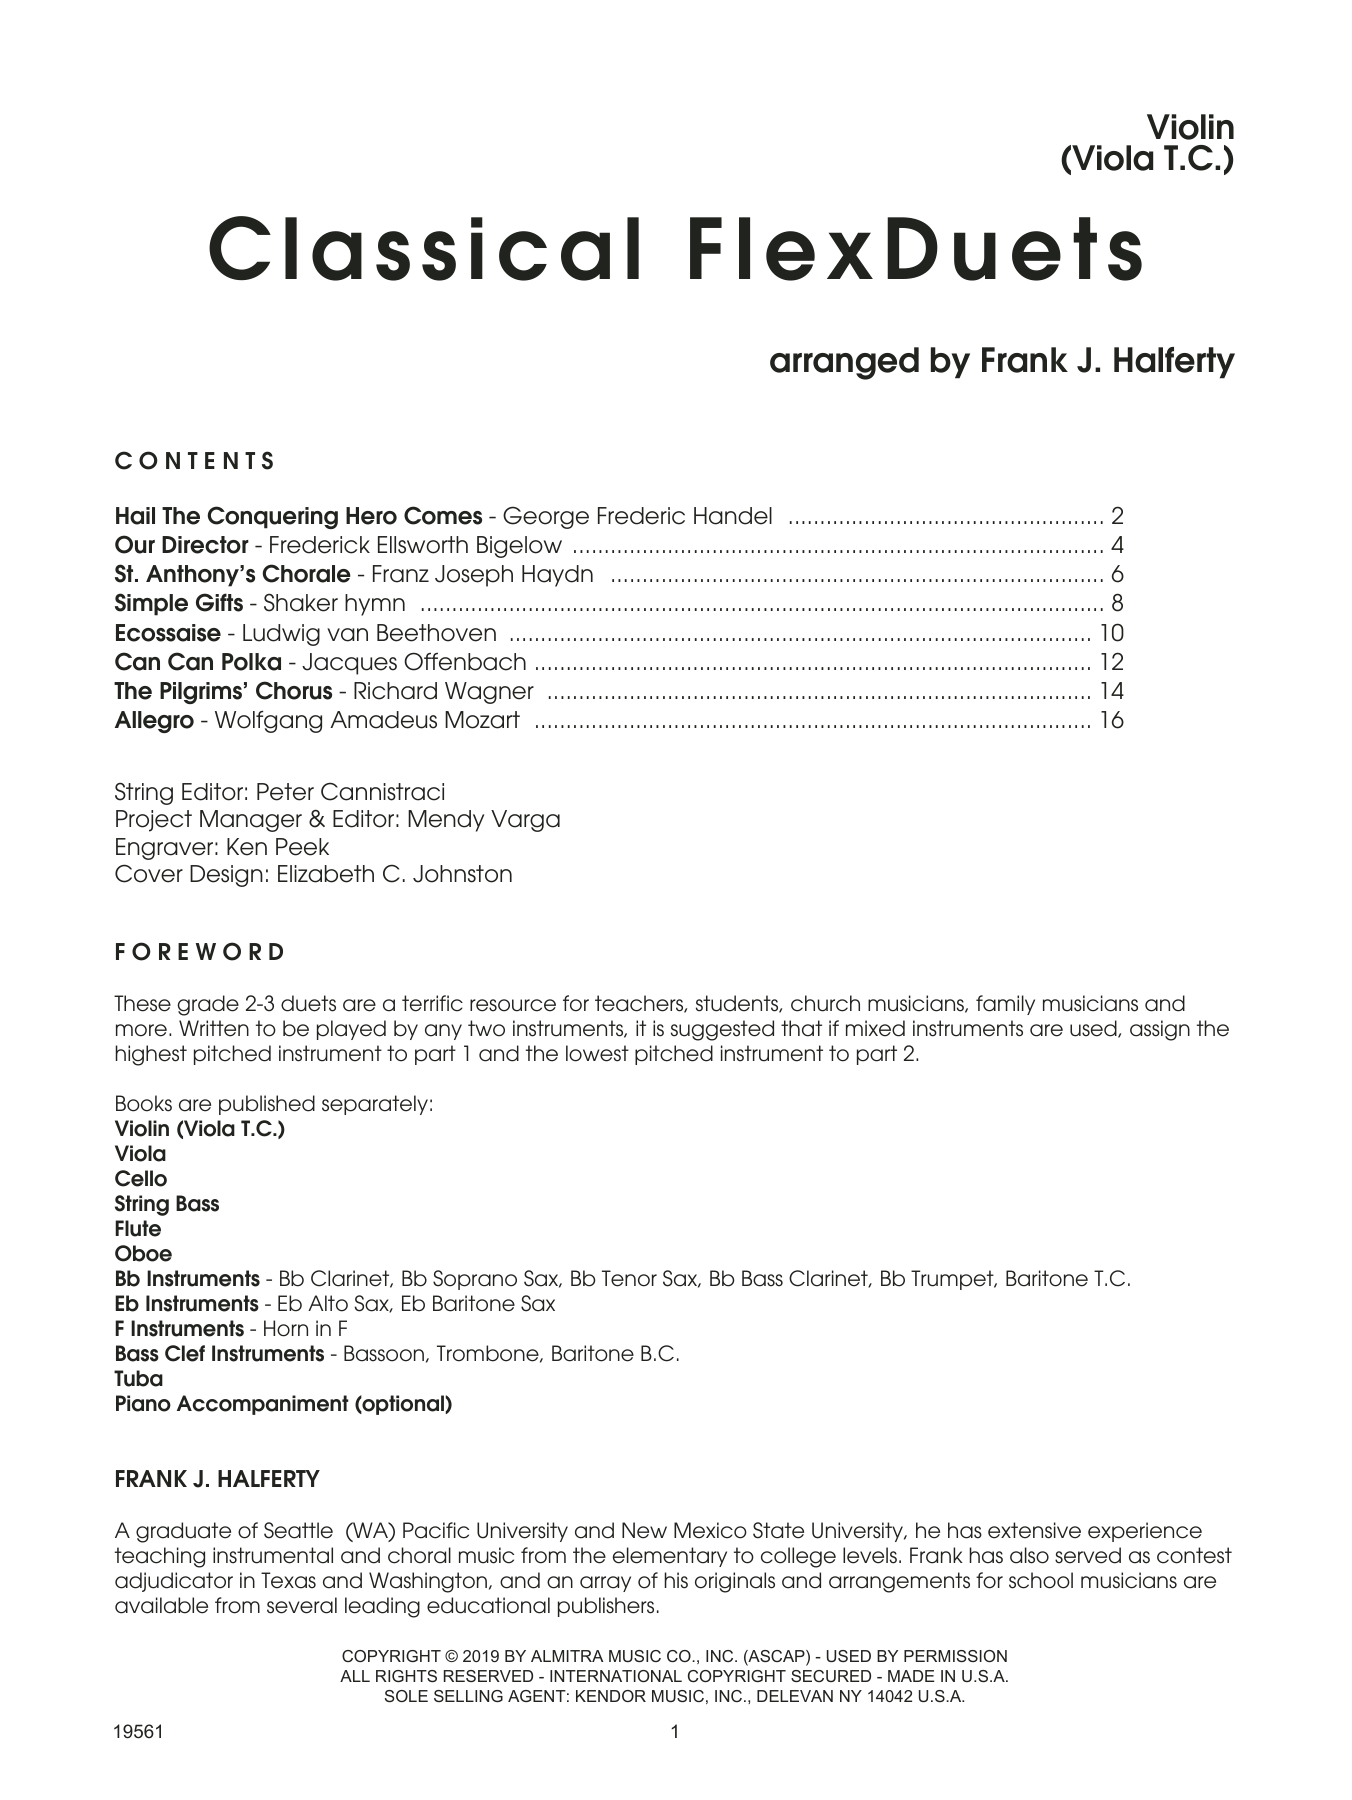 Frank J. Halferty Classical Flexduets - Violin sheet music preview music notes and score for String Ensemble including 16 page(s)